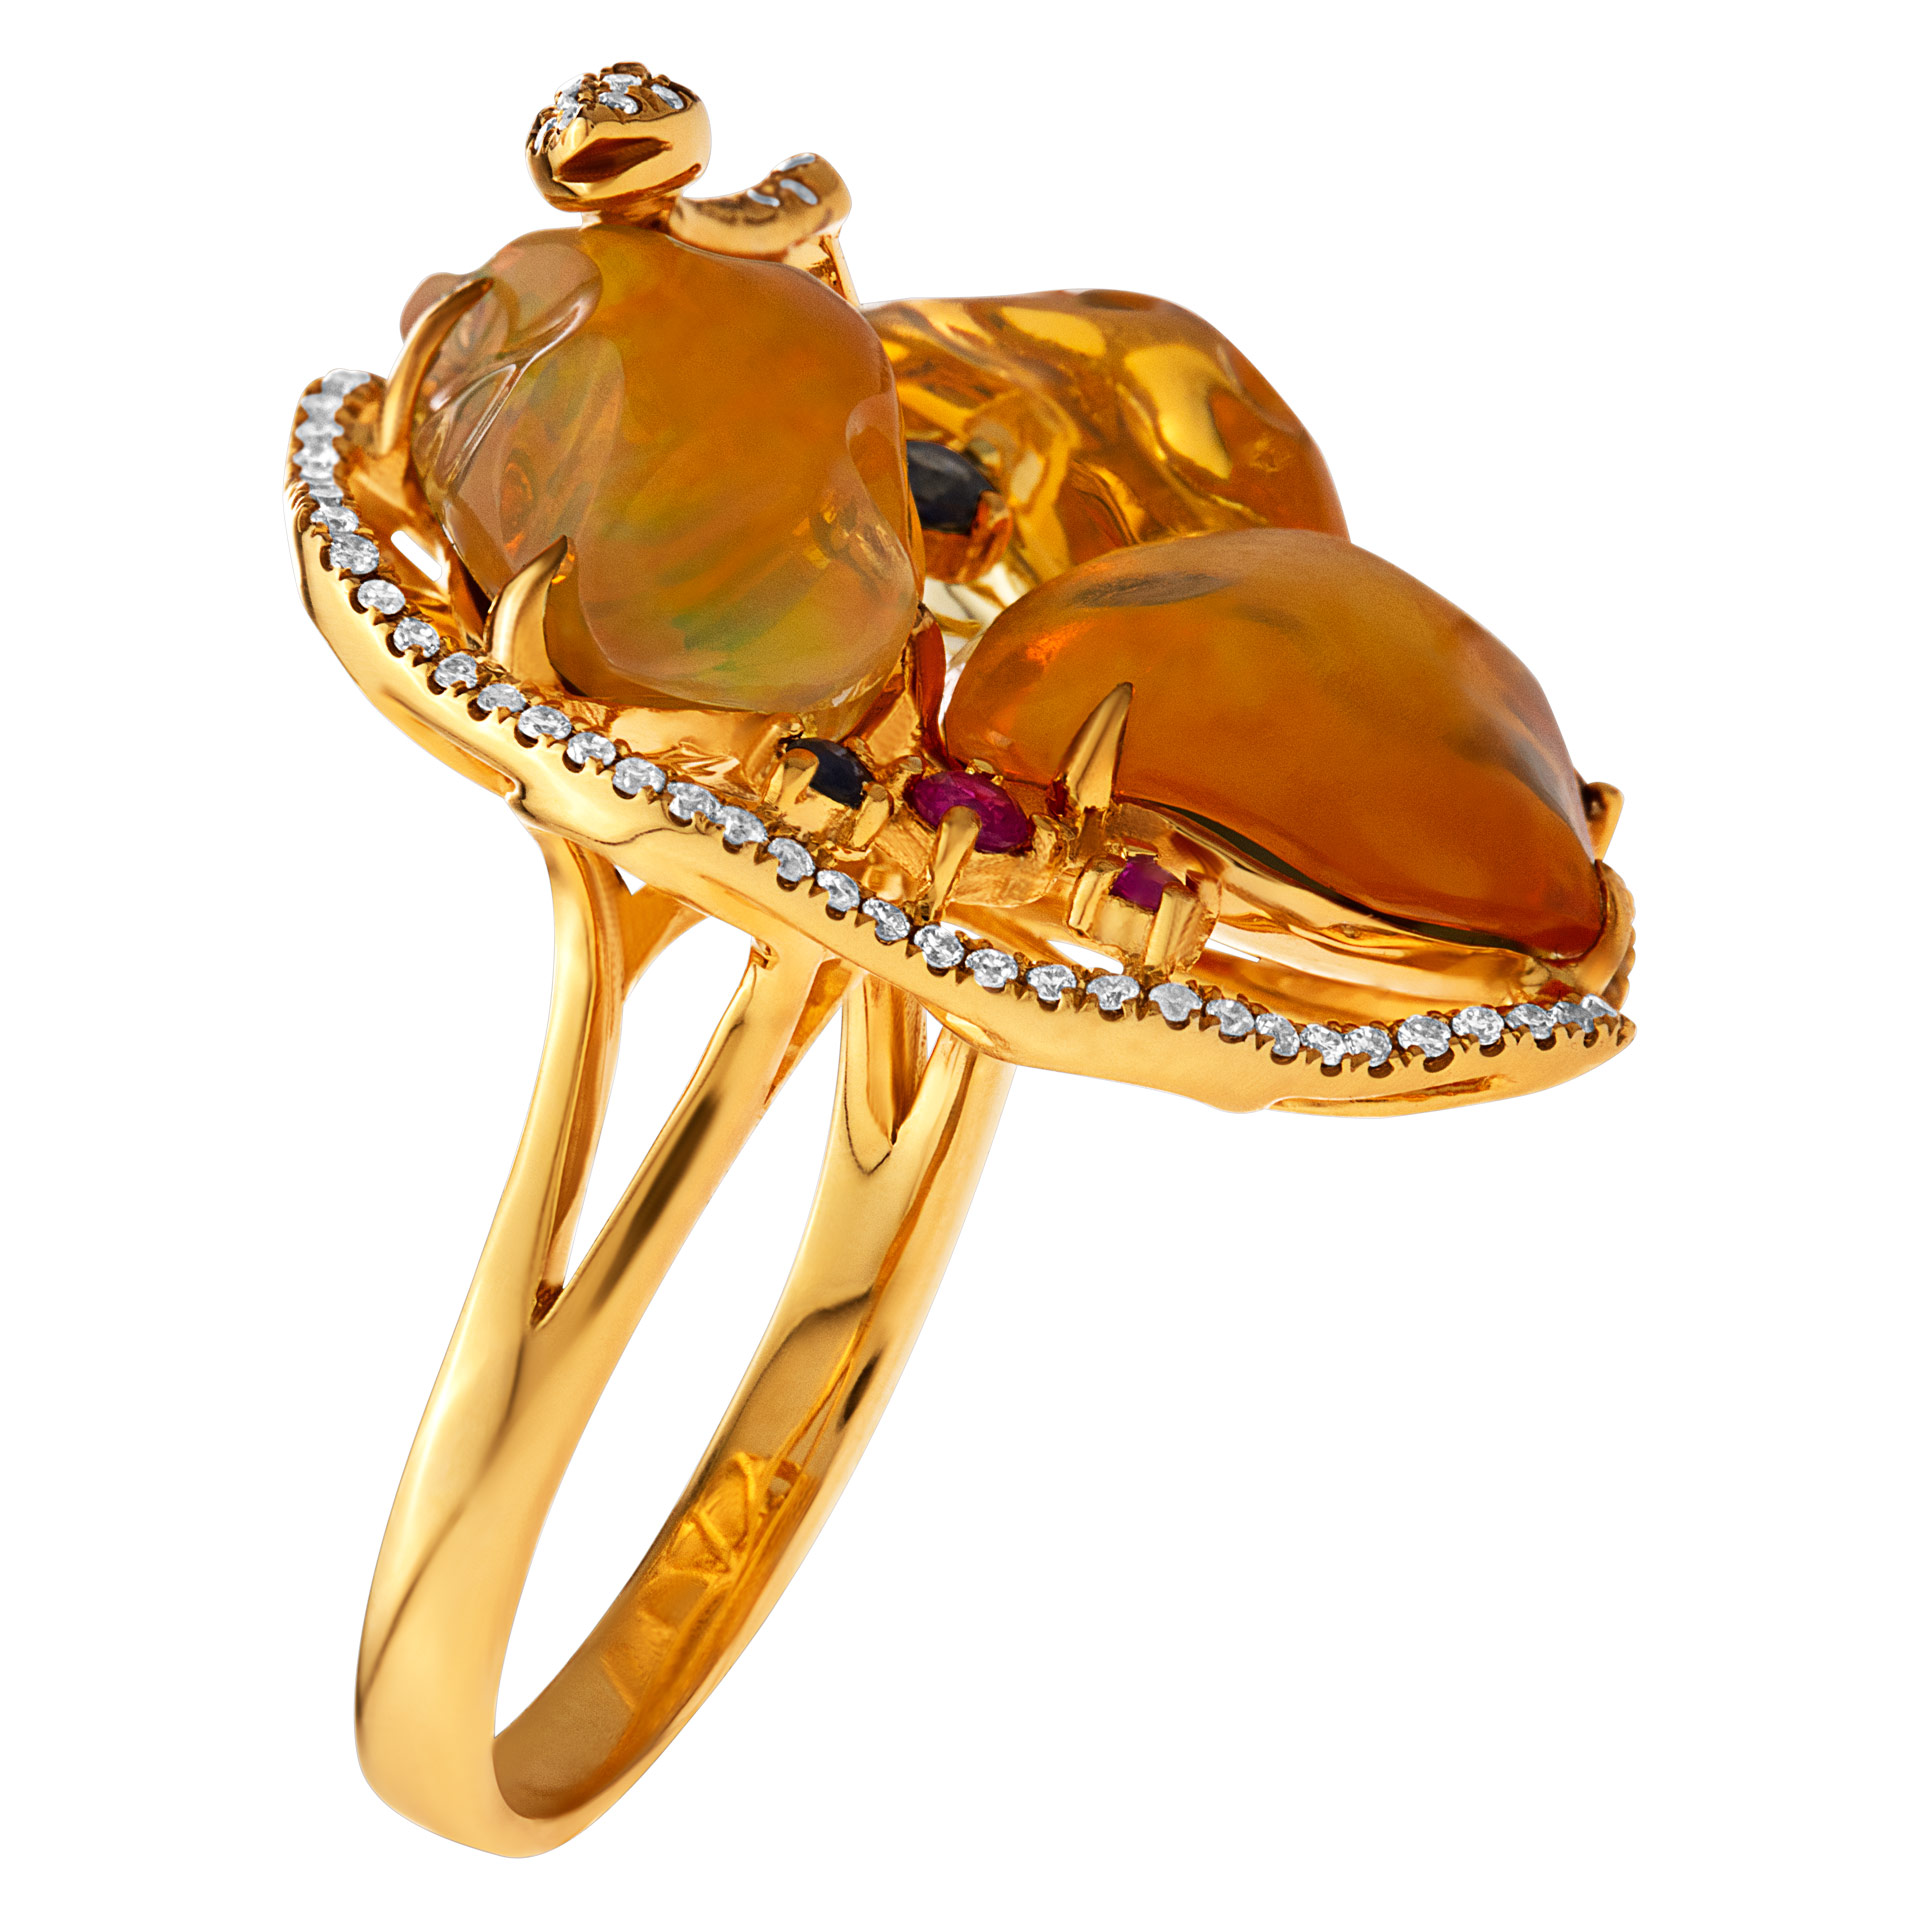 Fire opal ring in 18K yellow gold with diamond accents. 9.8cts in Opal. Size 7 image 2